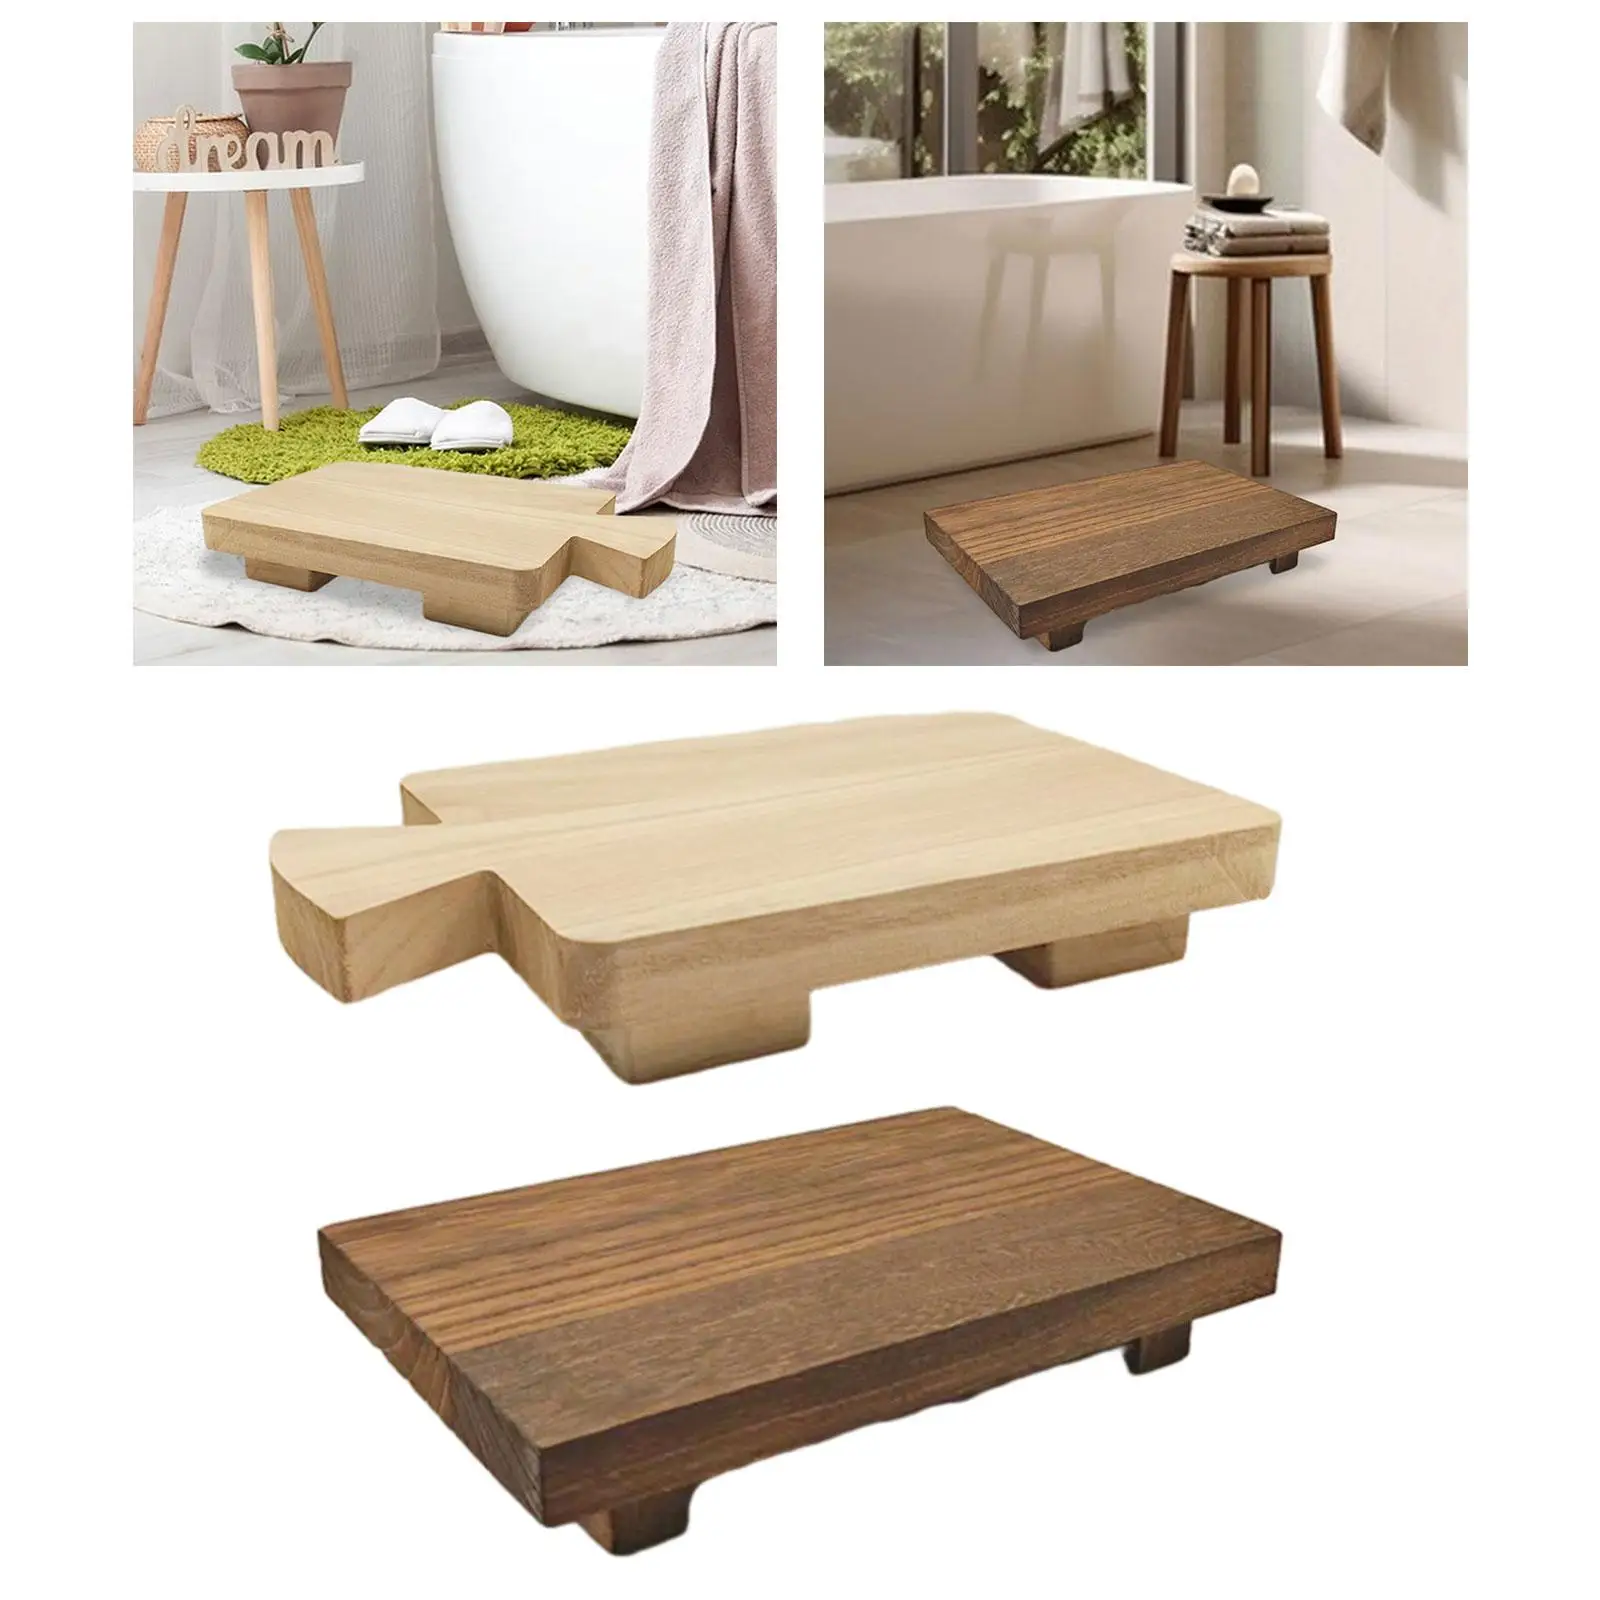 Wooden Pedestal Stand Rustic Footed Tray for Tabletop Indoor Kitchen Counter